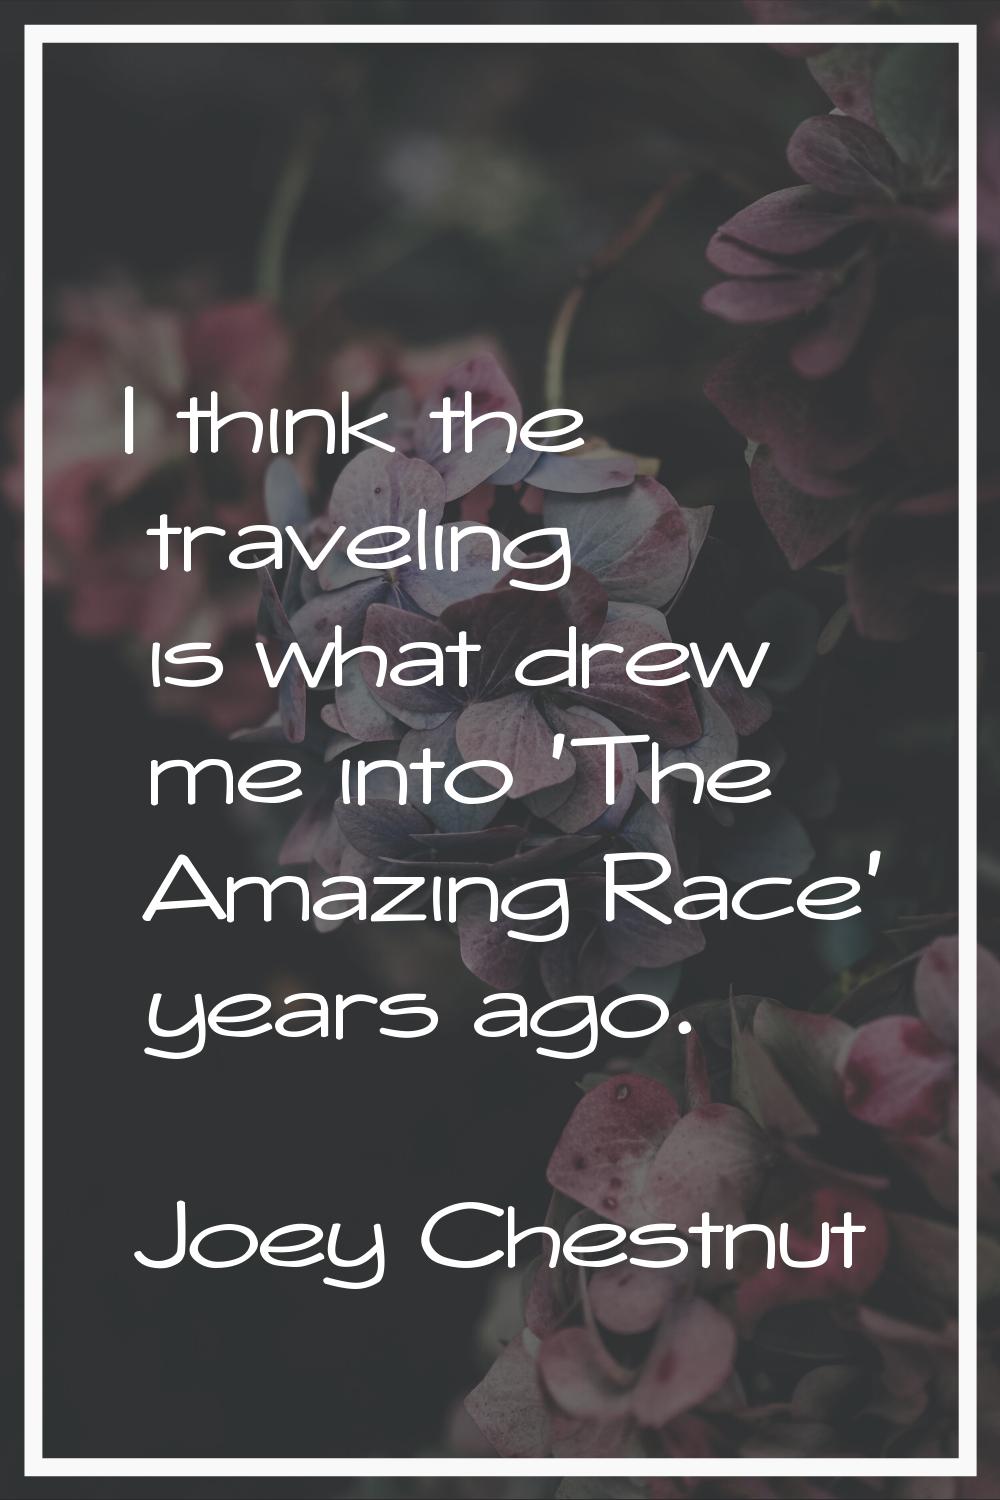 I think the traveling is what drew me into 'The Amazing Race' years ago.